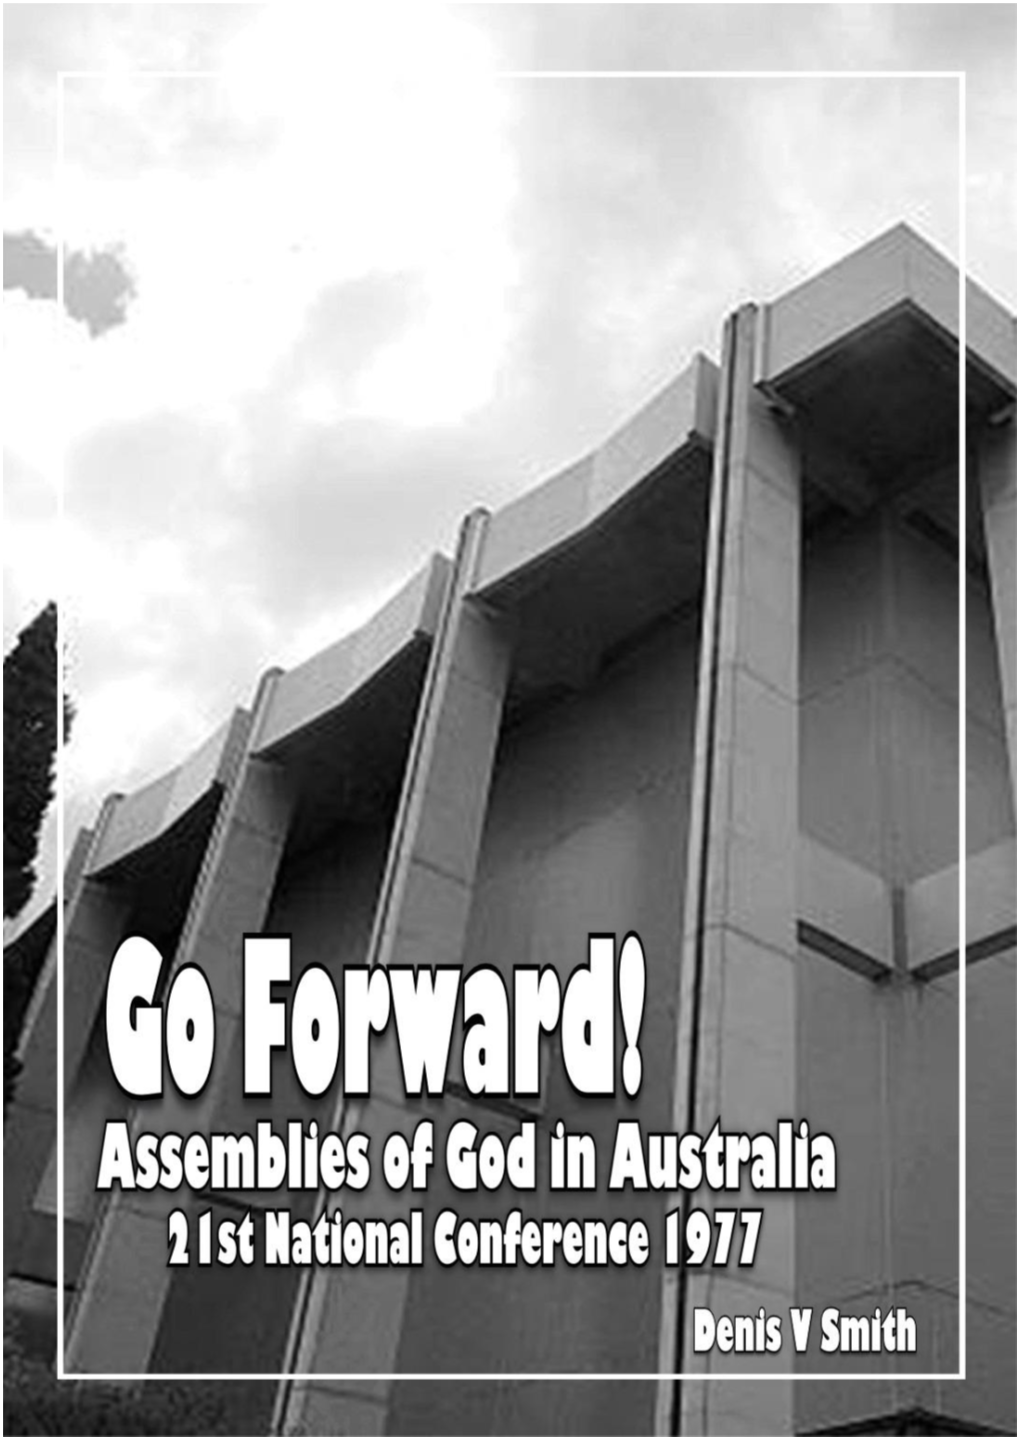 Fellowship Go Forward! – Assemblies of God in Australia Conference 1977 Page 1 of 50